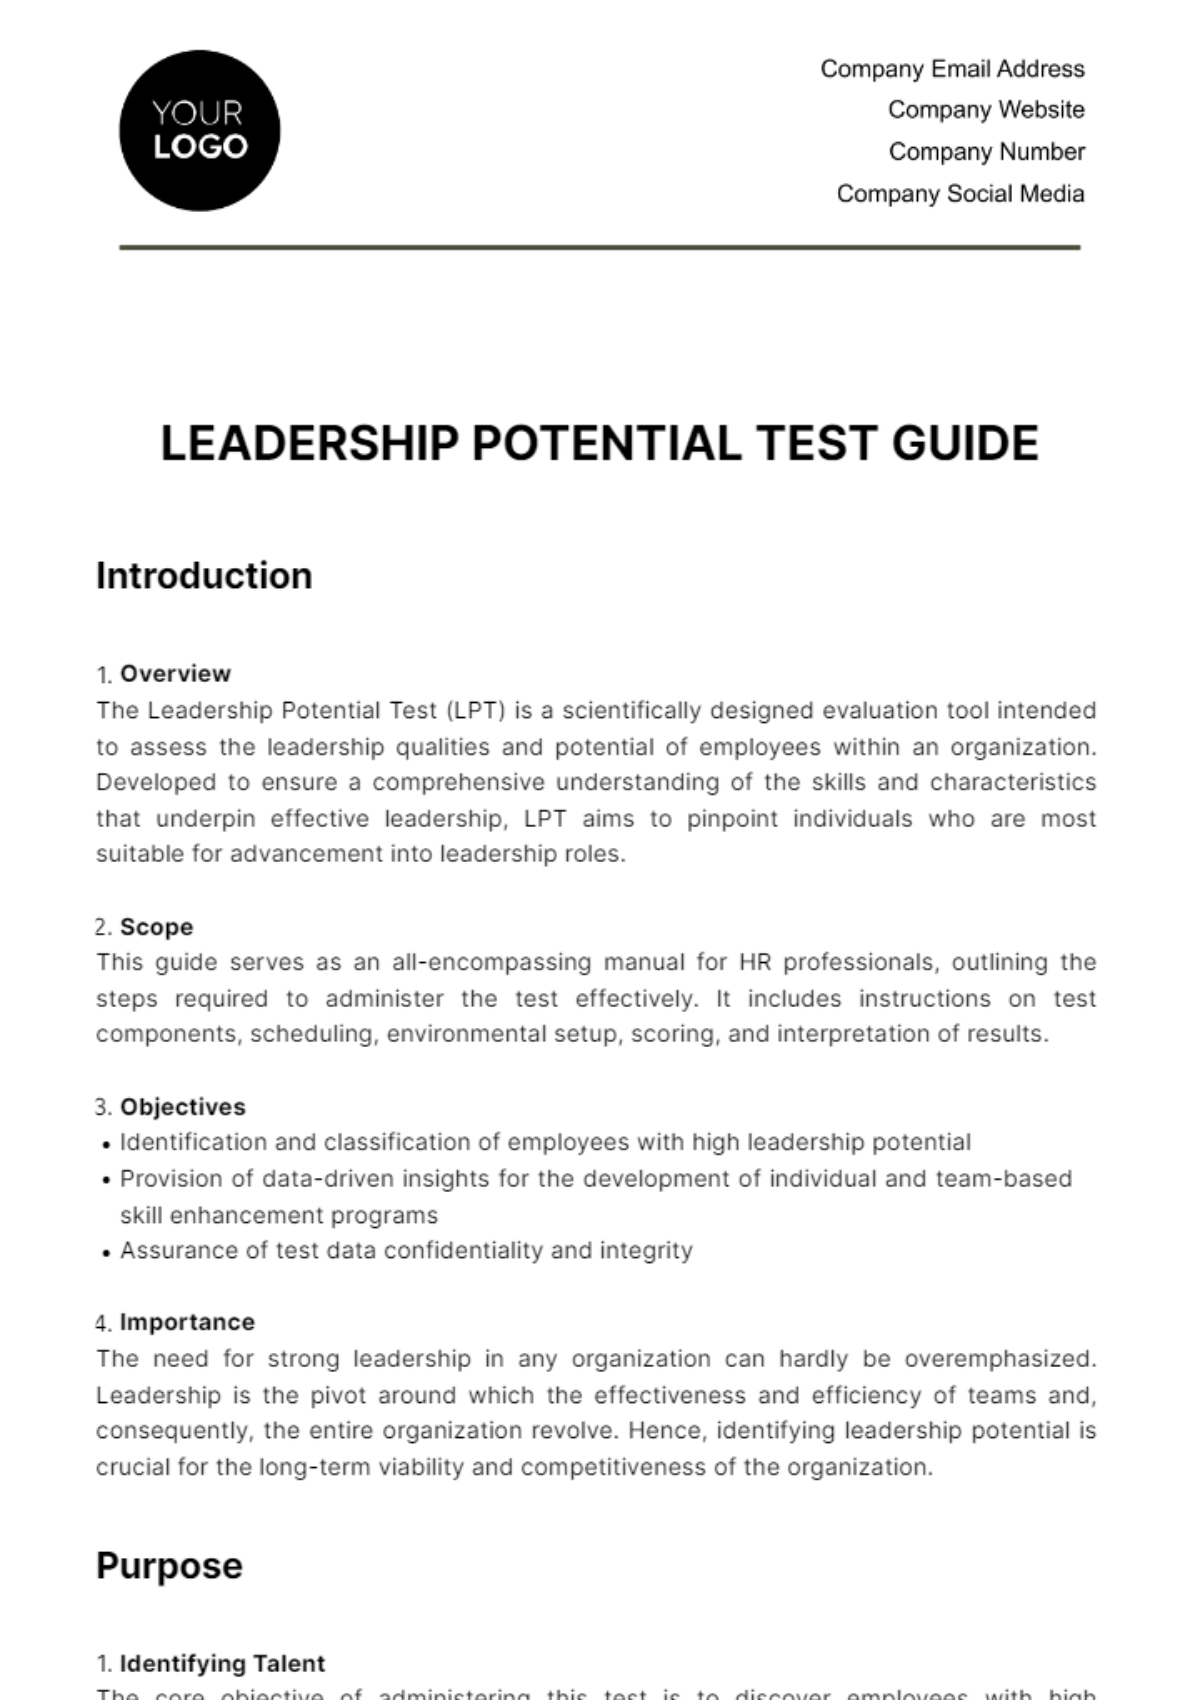 Free Leadership Potential Test Guide HR Template